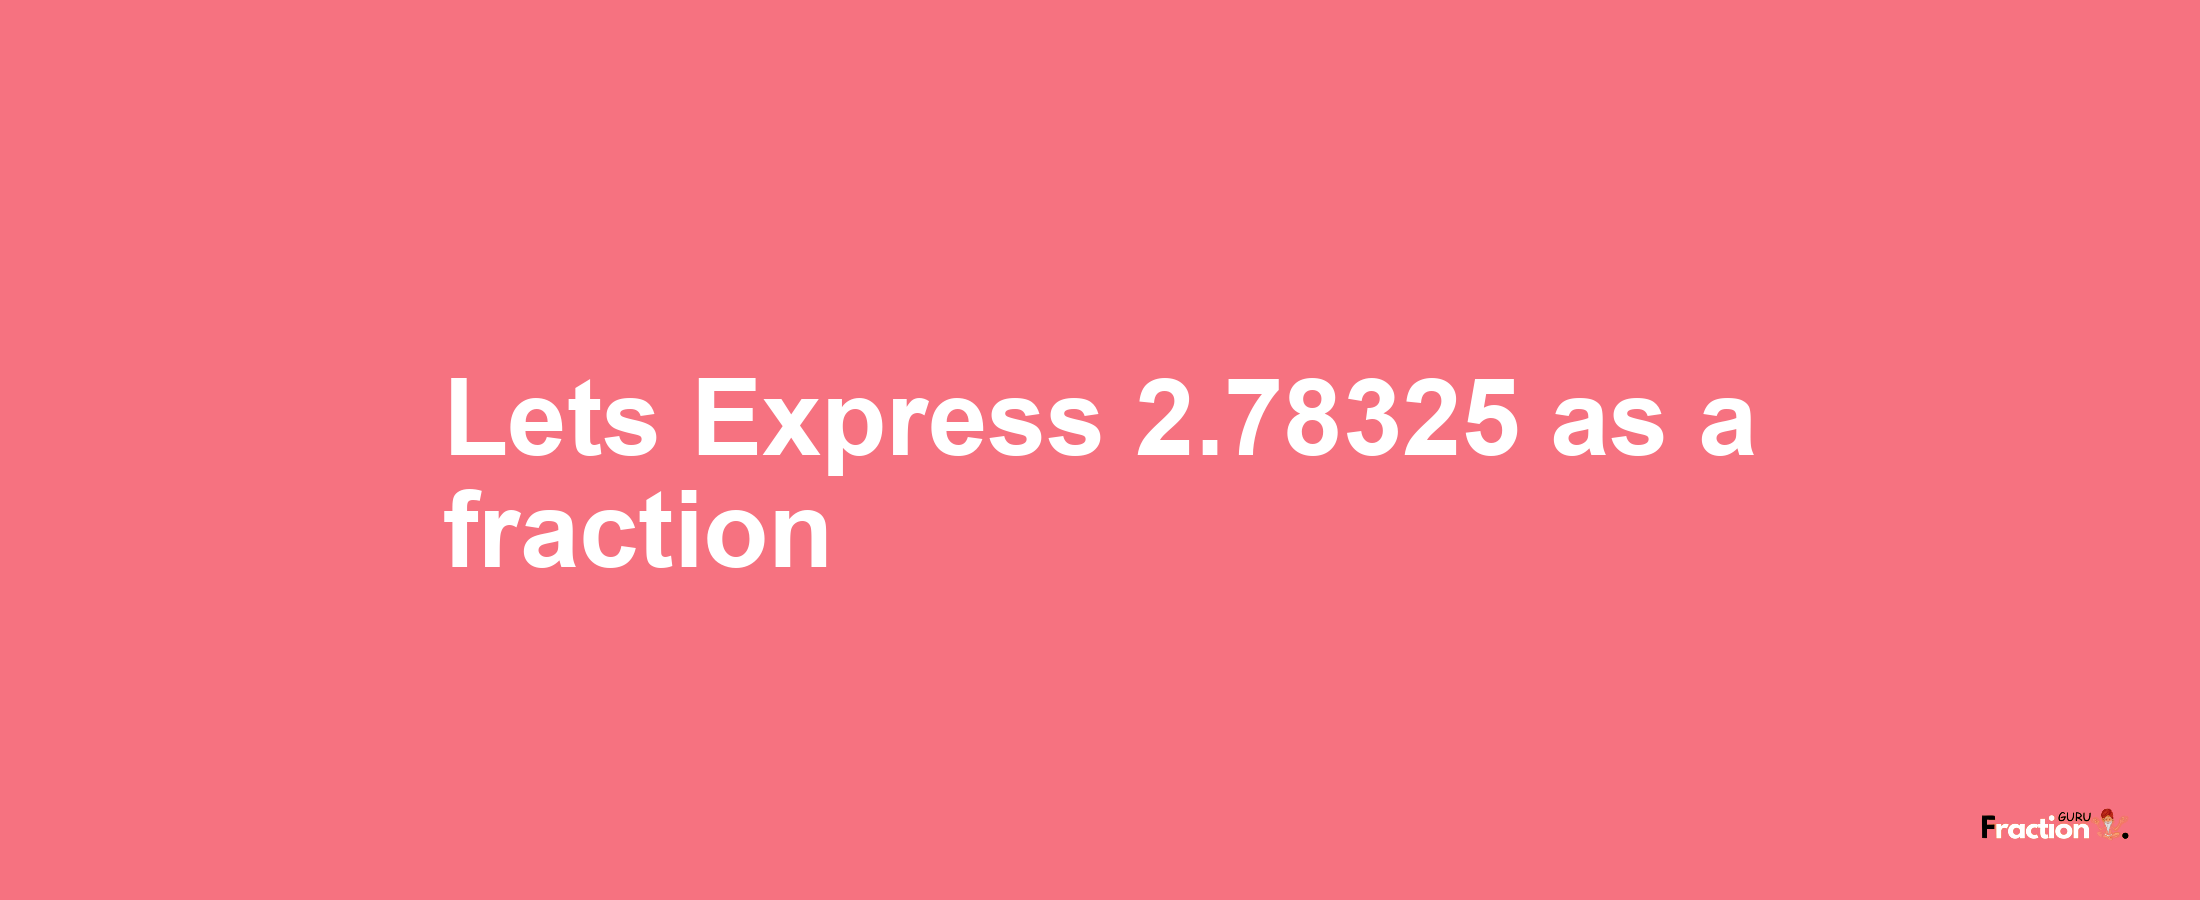 Lets Express 2.78325 as afraction